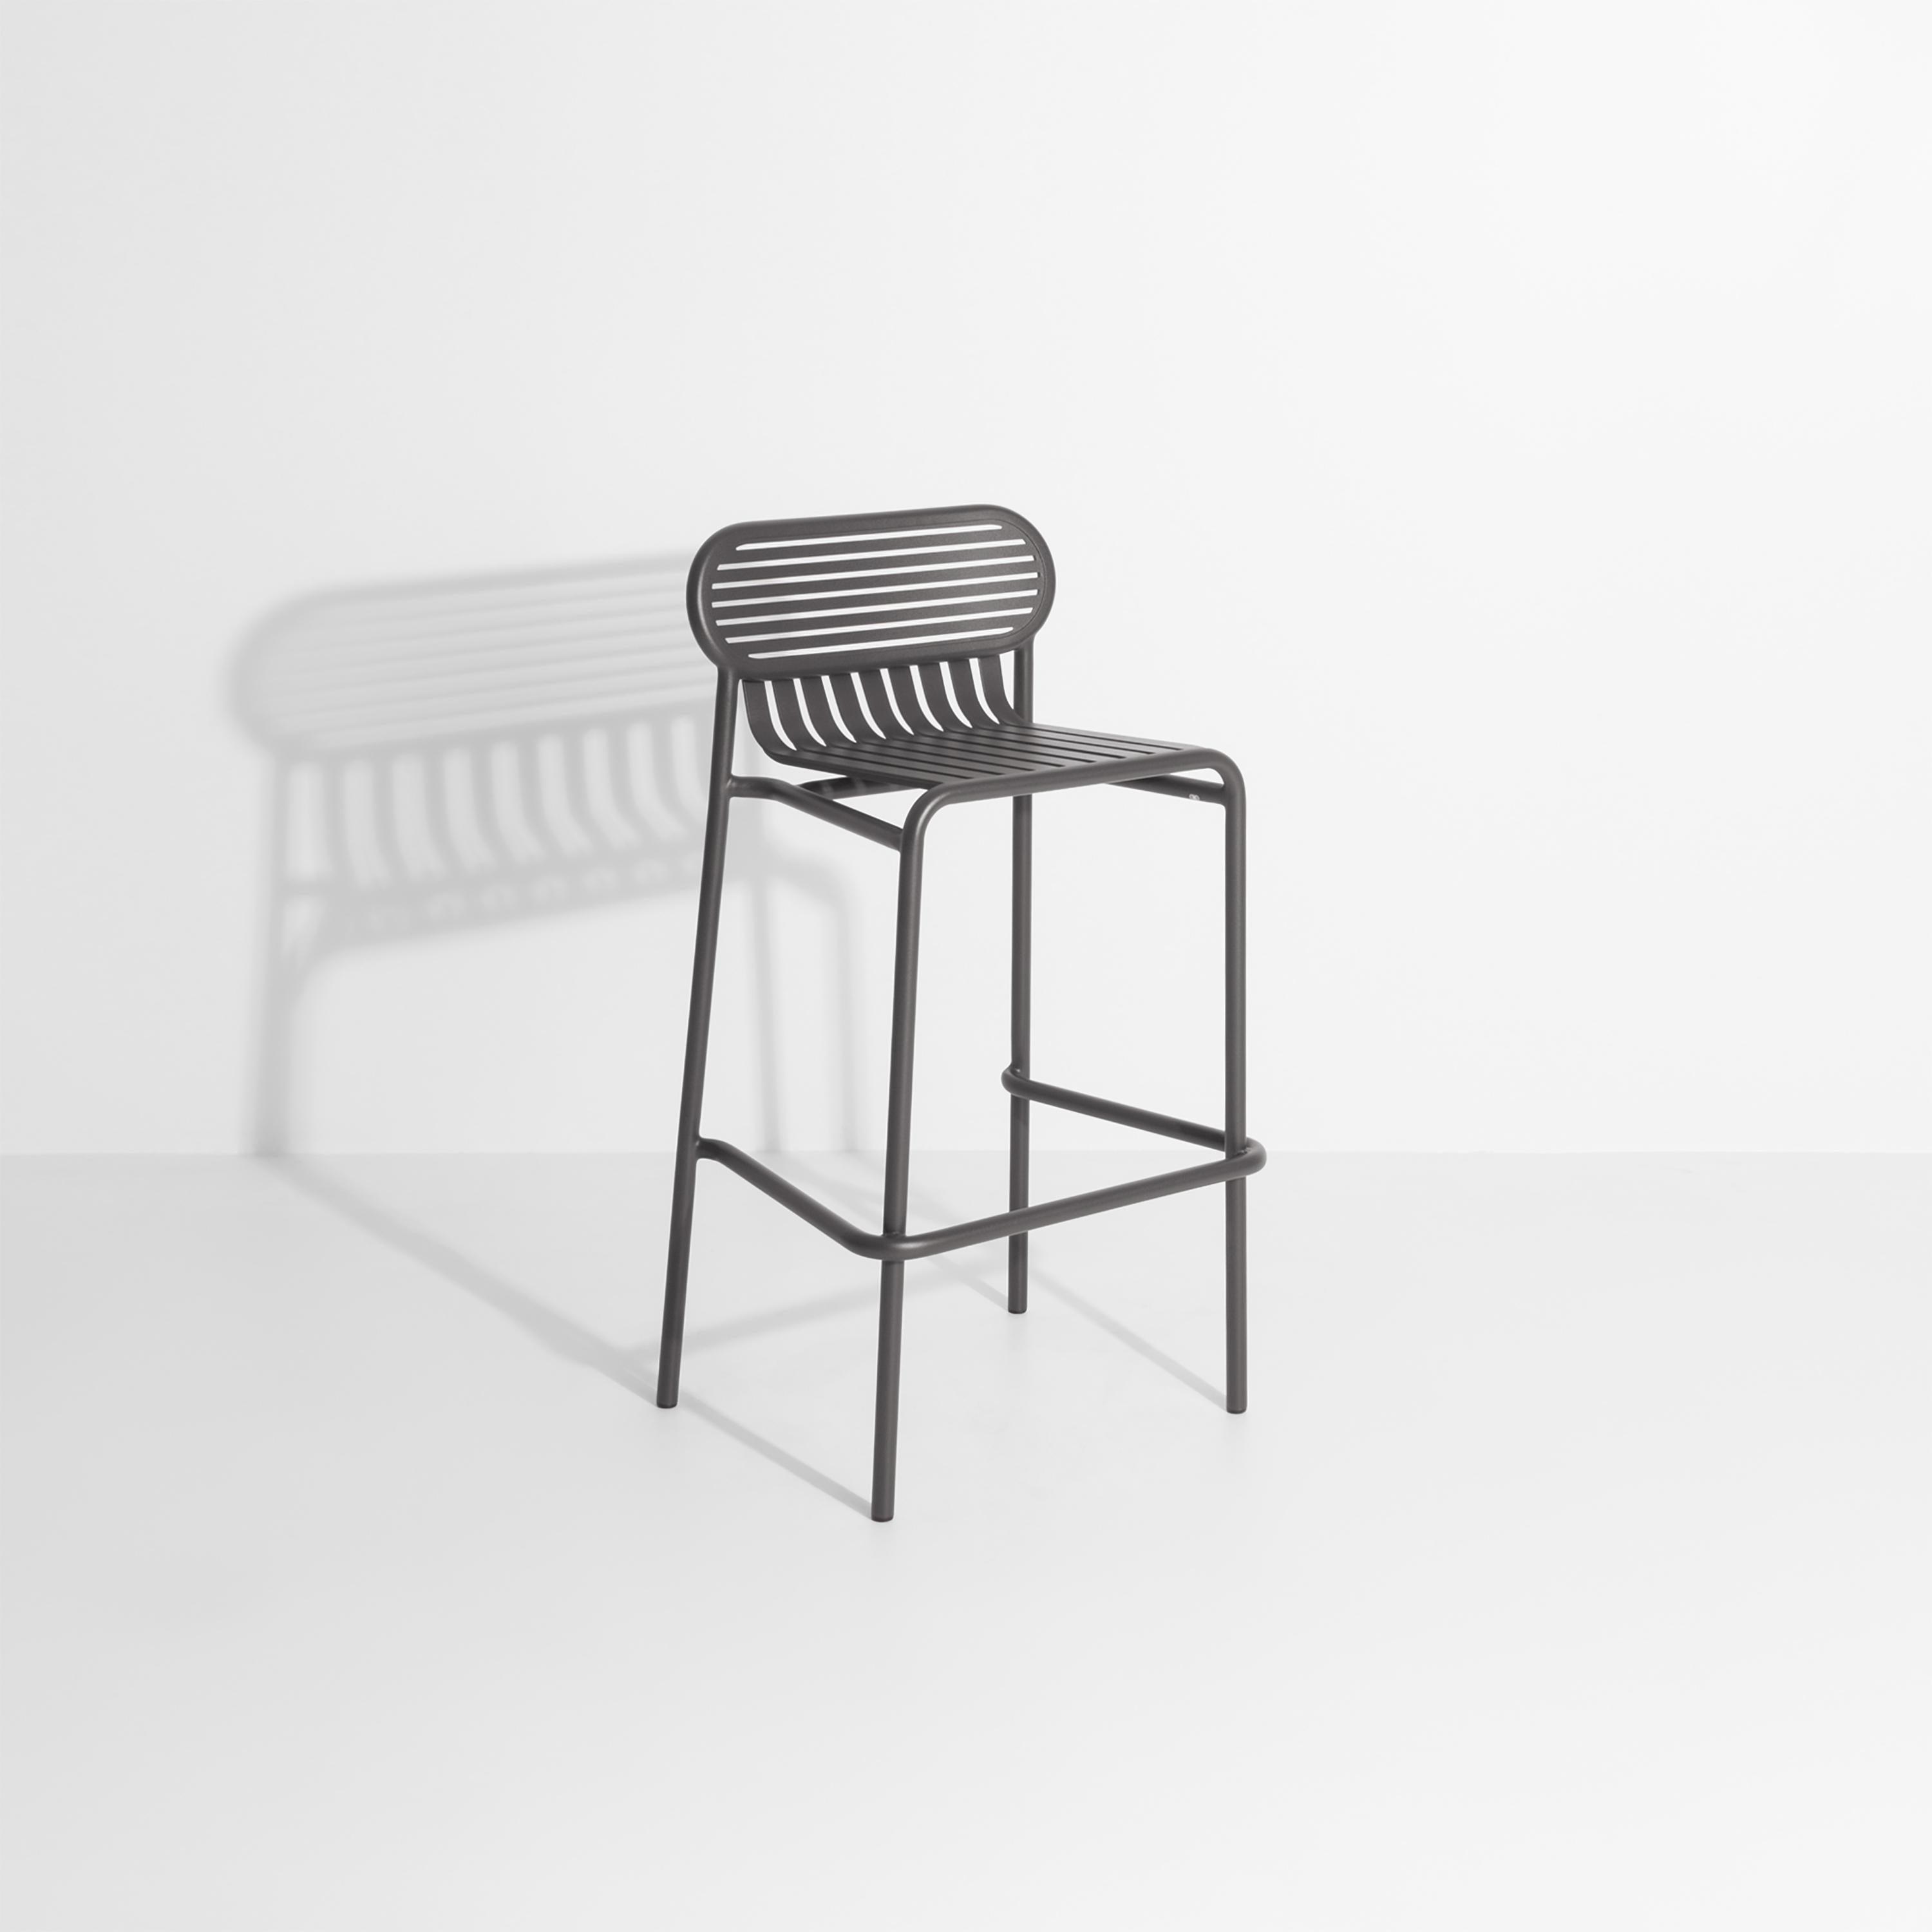 Petite Friture Week-End Bar Stool in Anthracite Aluminium by Studio BrichetZiegler, 2017

The week-end collection is a full range of outdoor furniture, in aluminium grained epoxy paint, matt finish, that includes 18 functions and 8 colours for the